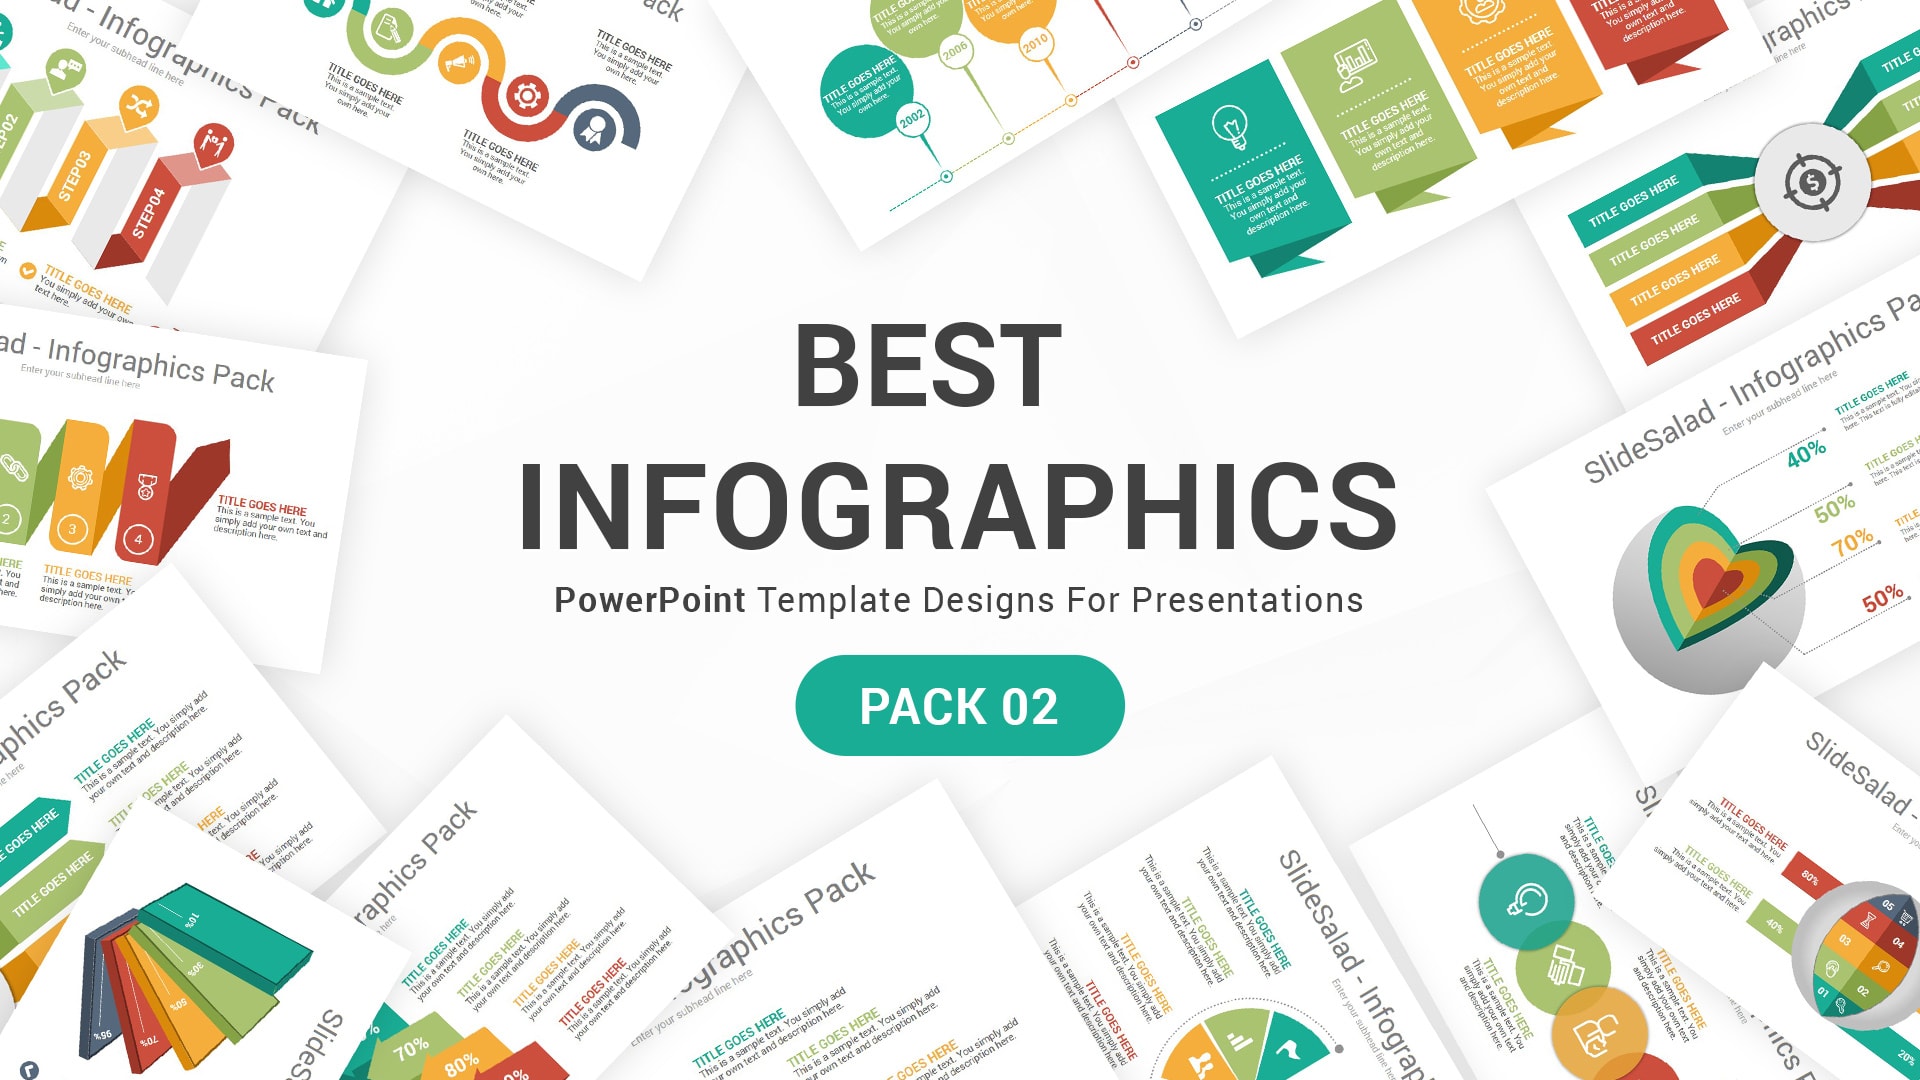 Best Infographics Designs Pack Best Multipurpose PowerPoint Templates for Corporate Presentation